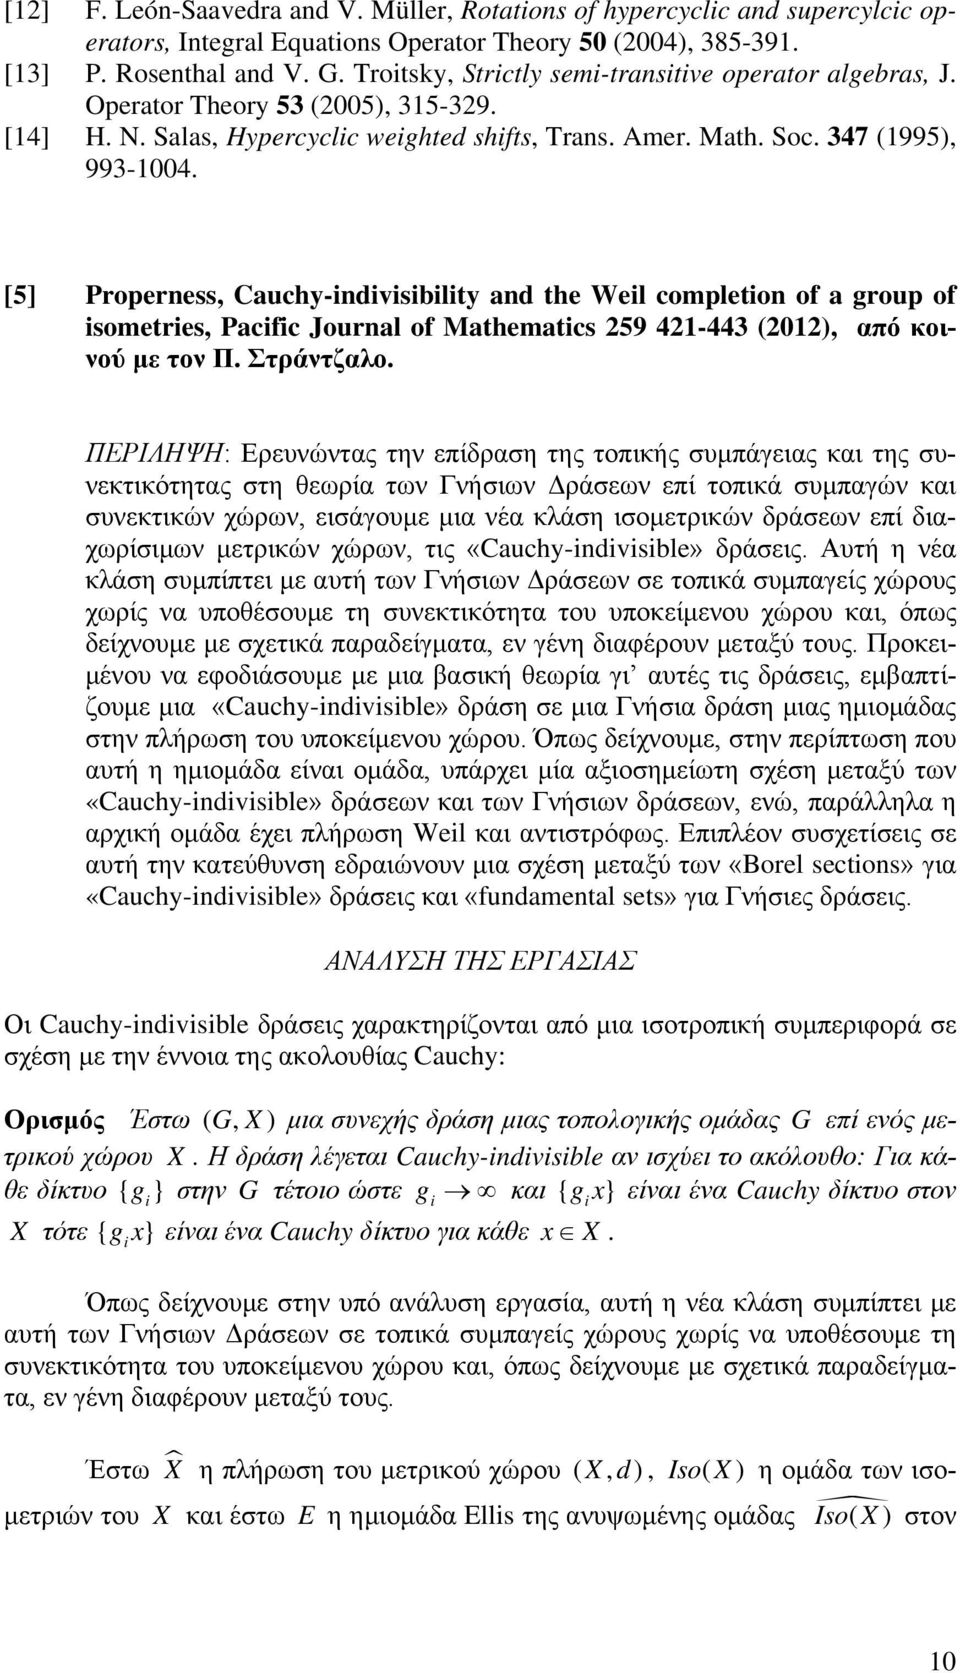 [5] Properess, Cauchy-idivisibility ad the Weil completio of a group of isometries, Pacific Joural of Mathematics 259 421-443 (2012), από κοινού με τον Π. Στράντζαλο.